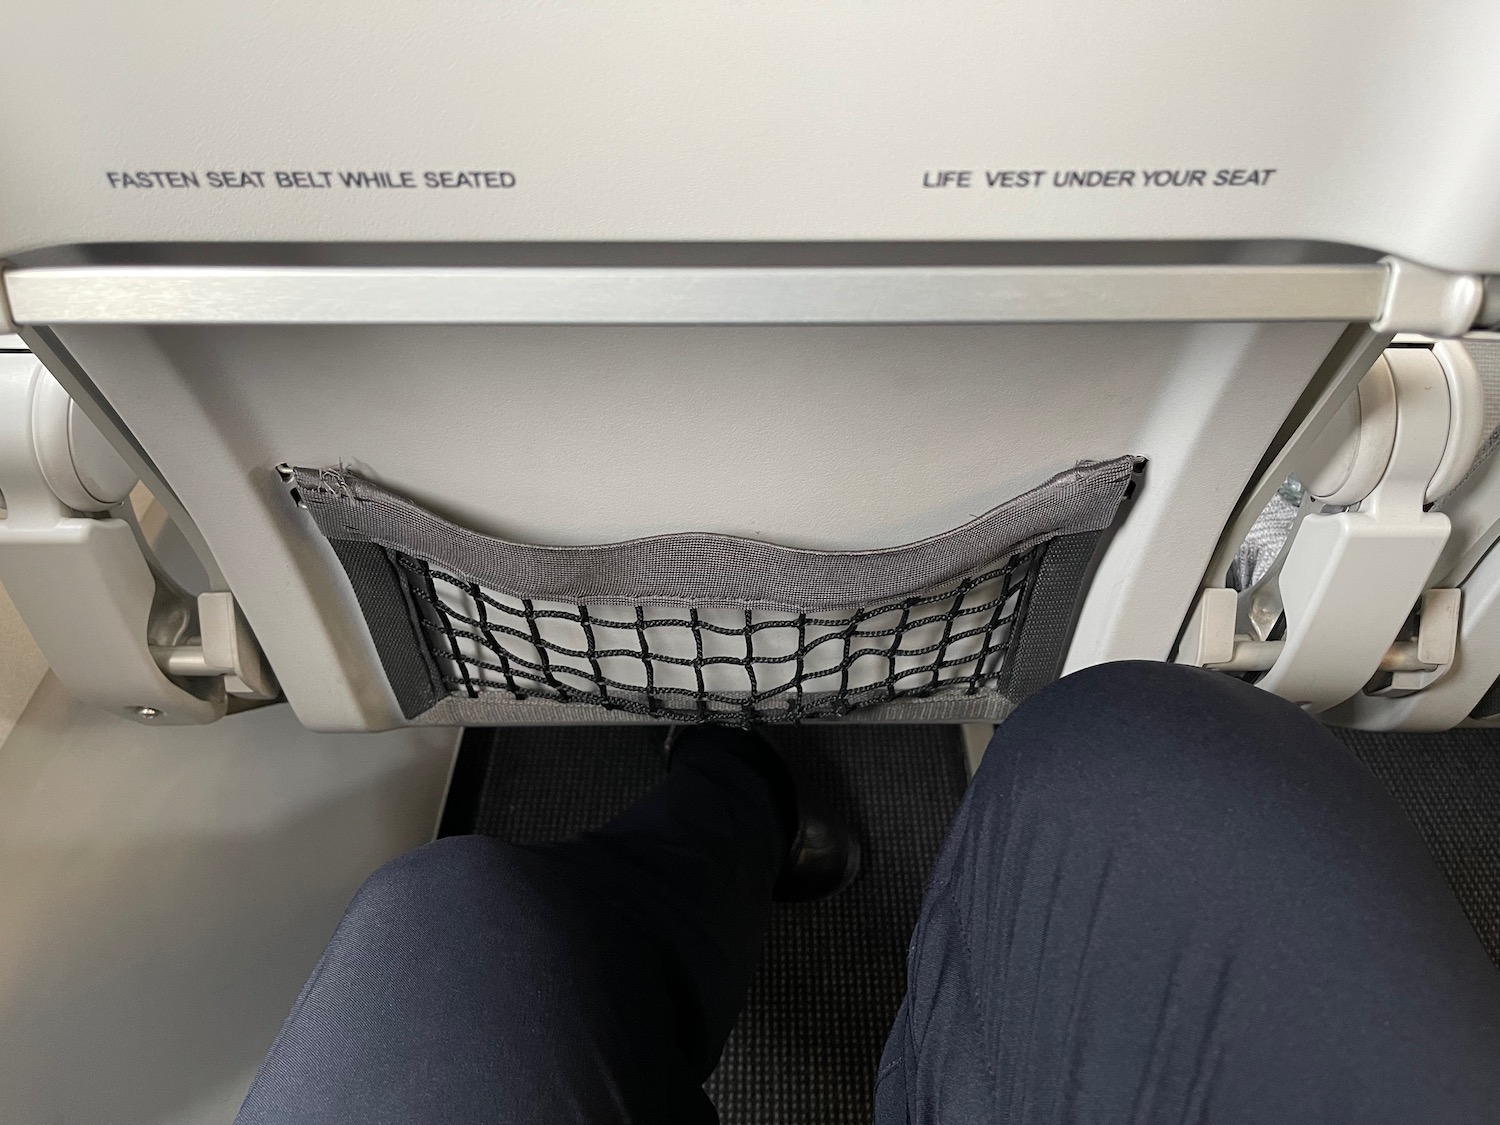 a person's legs and a net on an airplane